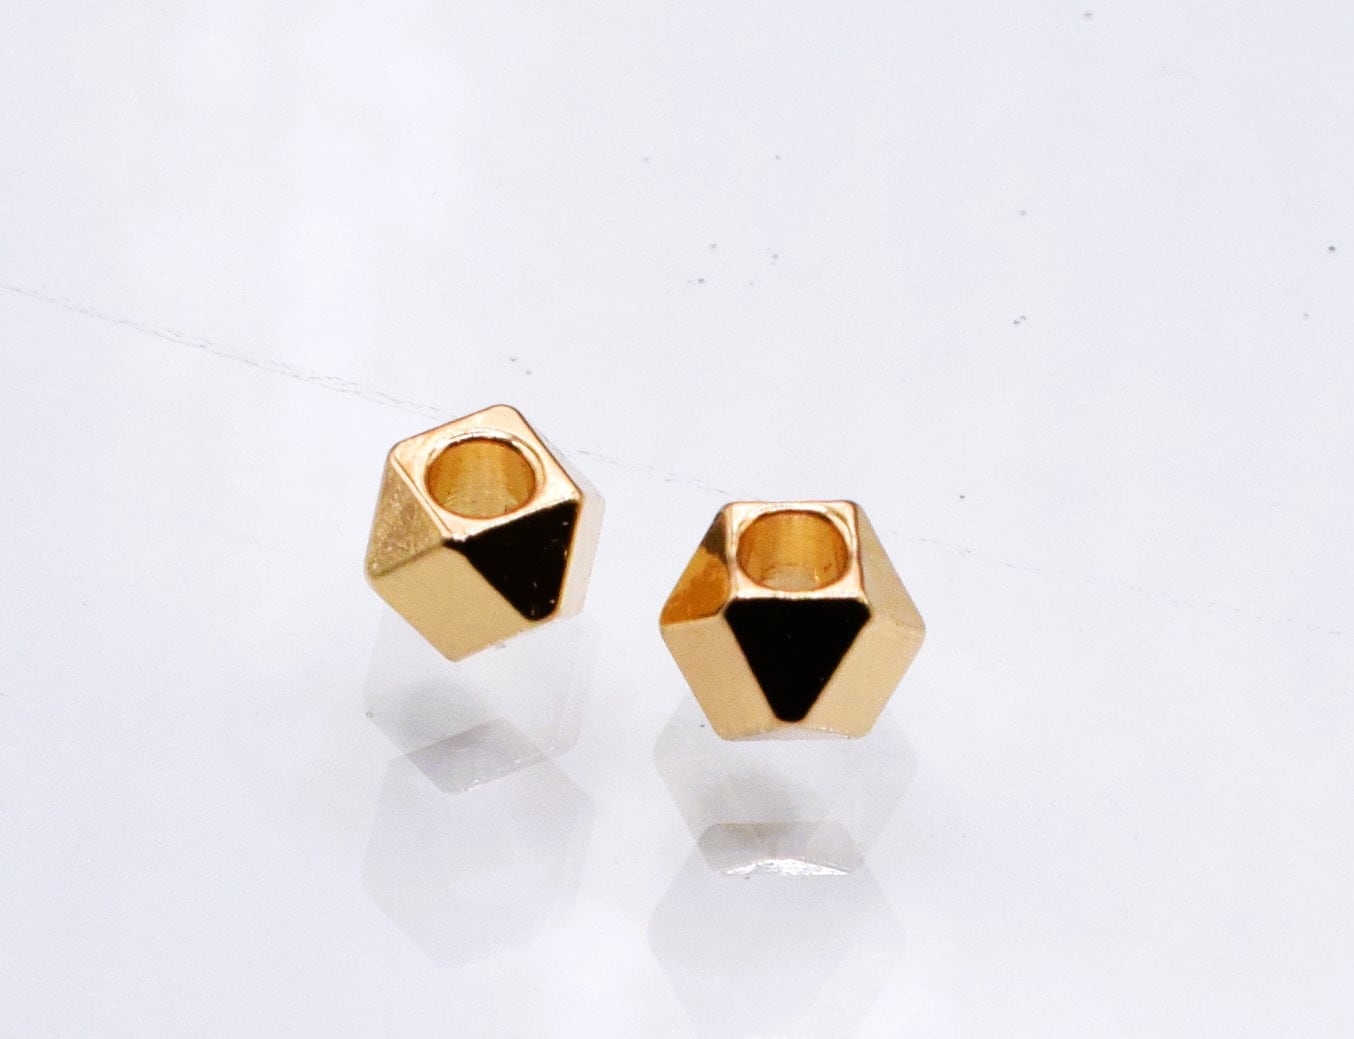 10 PCs Gold filled EP Cube Box Faceted Square/Hexagon beads size 2mm,3mm,4mm,5mm,6mm spacer findings for jewelry Supplier and Wholesale